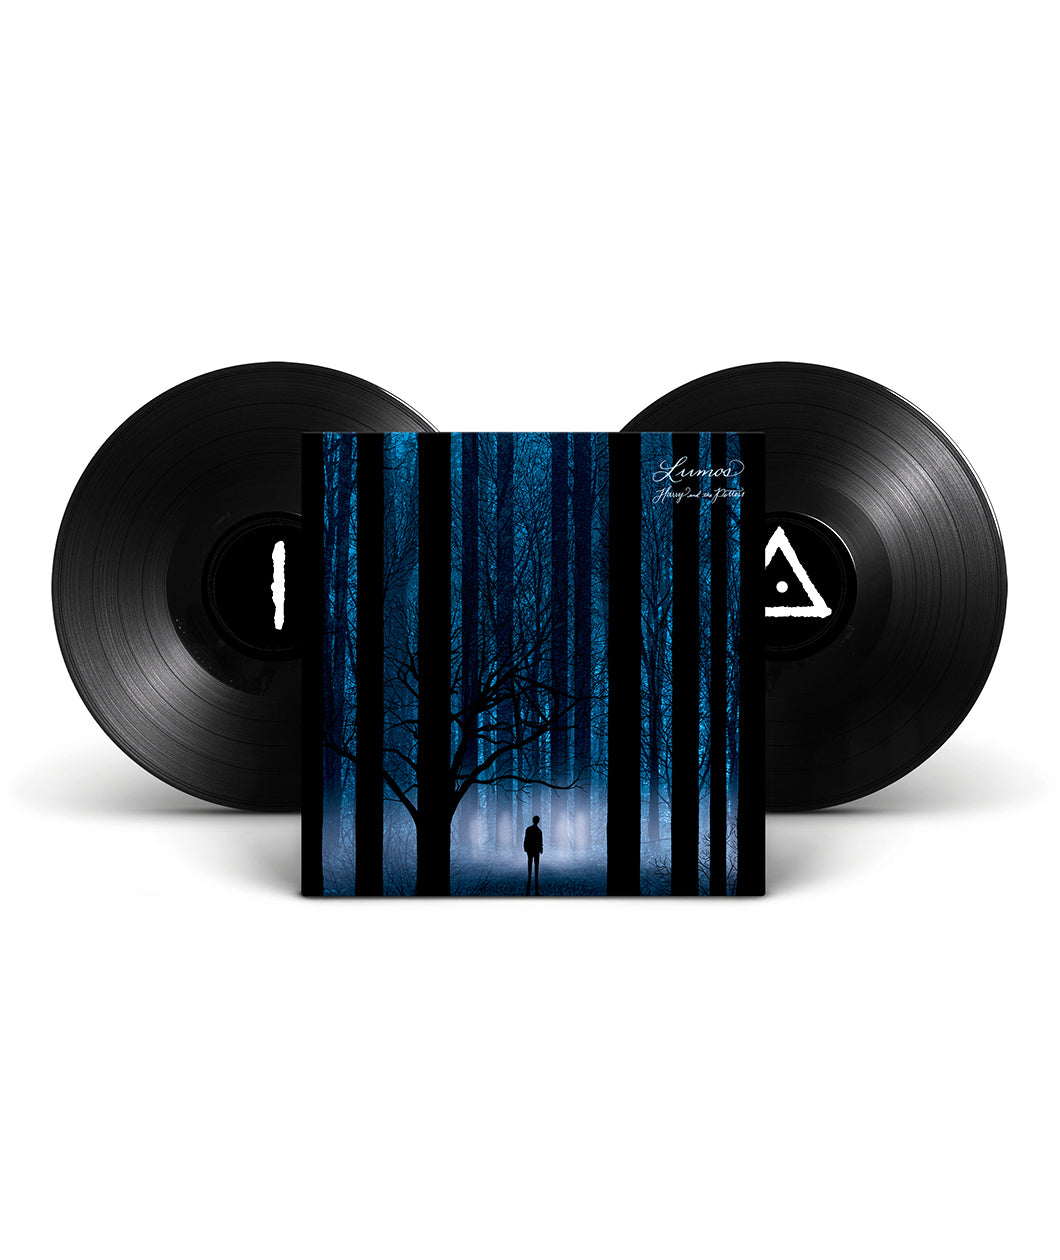 Two black vinyl records flank the record's cardboard sleeve. The sleeve depicts an ominous forest scene with blue light and black trees, and a lone figure stands amongst them. The text 